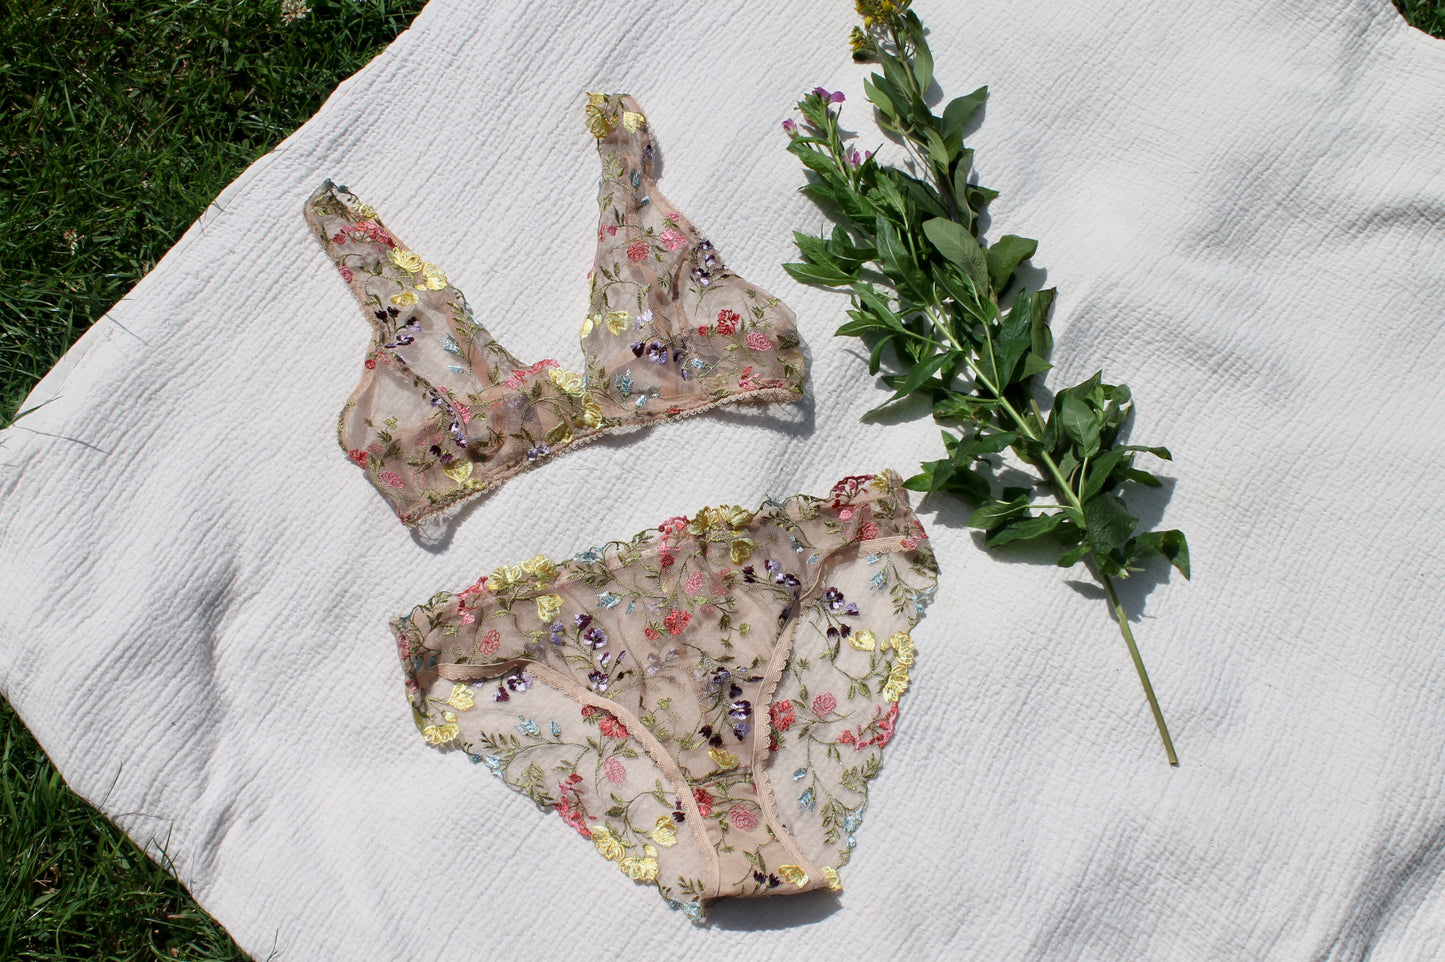 Embroidered flower bralette and knickers laid flat on a white picnic blanket with grass and flowers in the background